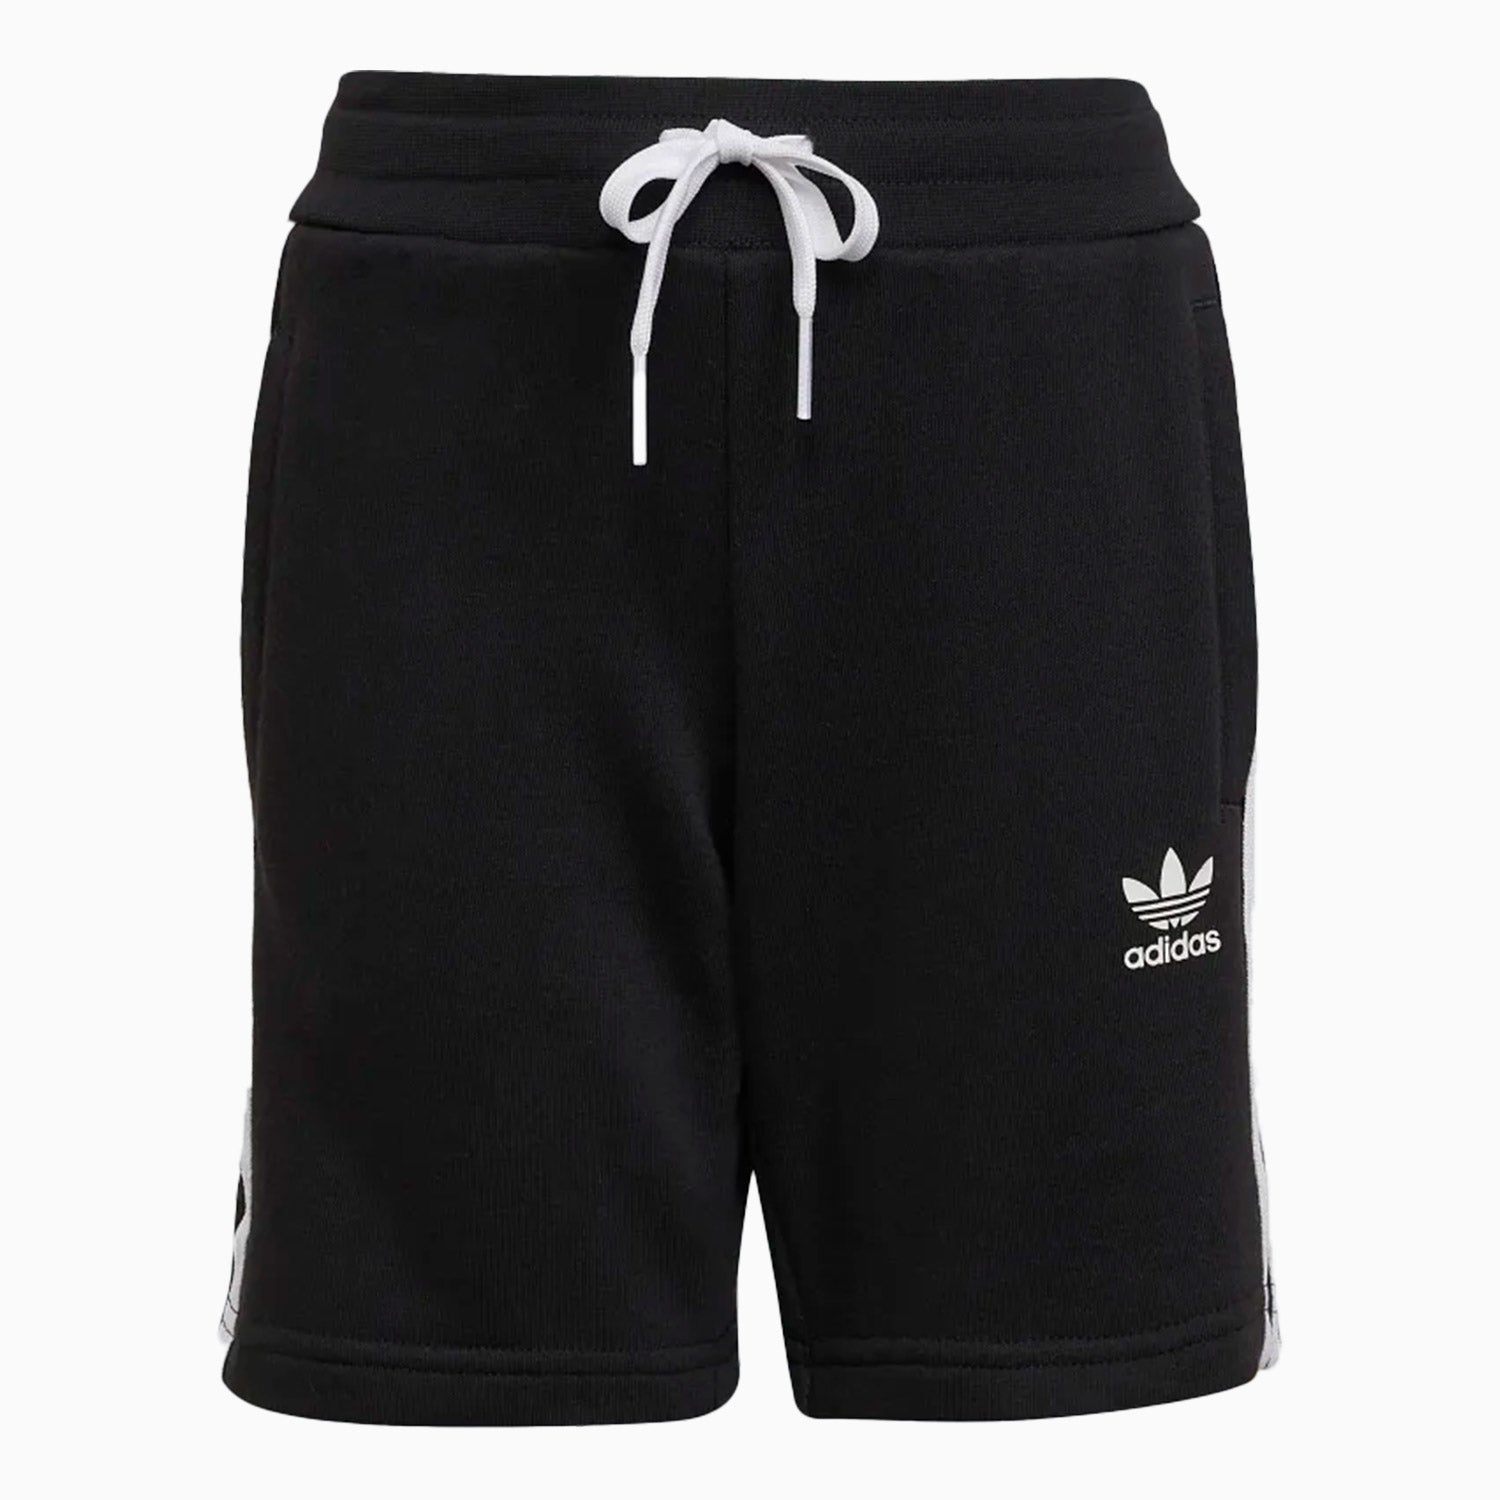 adidas-kids-short-and-t-shirt-set-outfit-hk2968